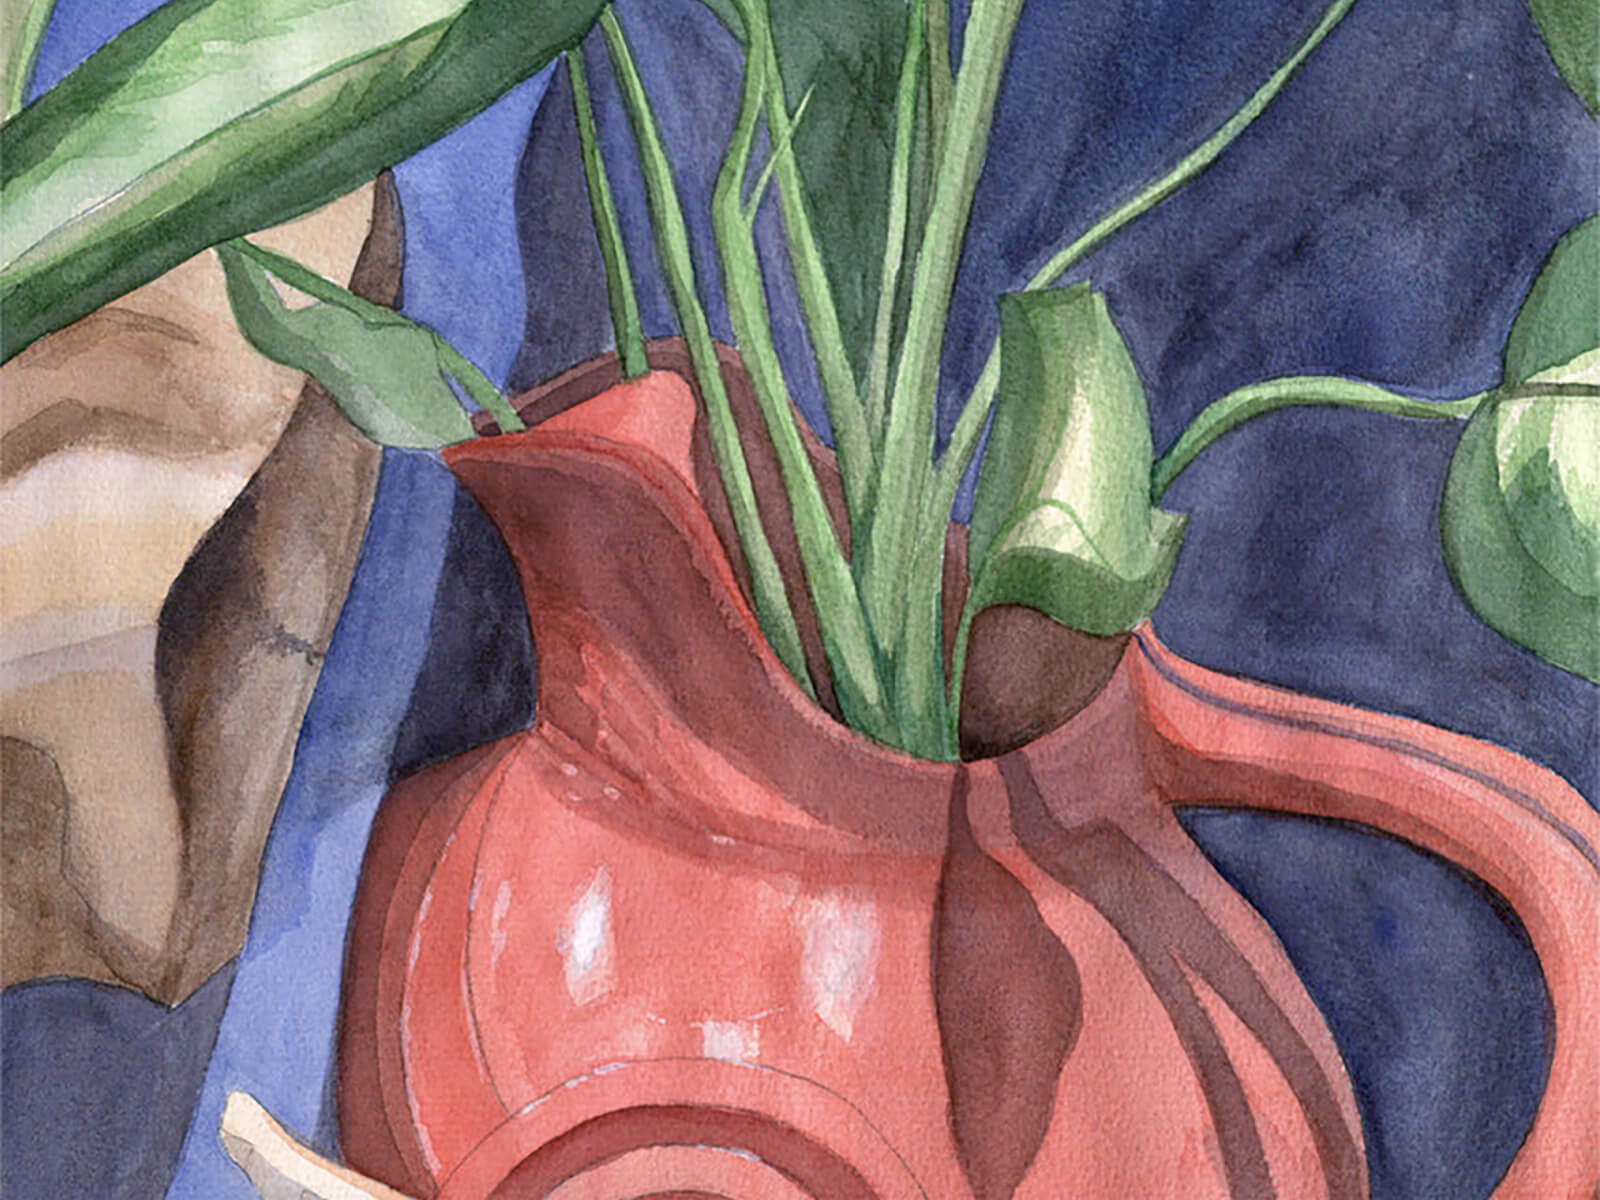 still-life traditional painting of a red pitcher filled with greenery against a blue draped background